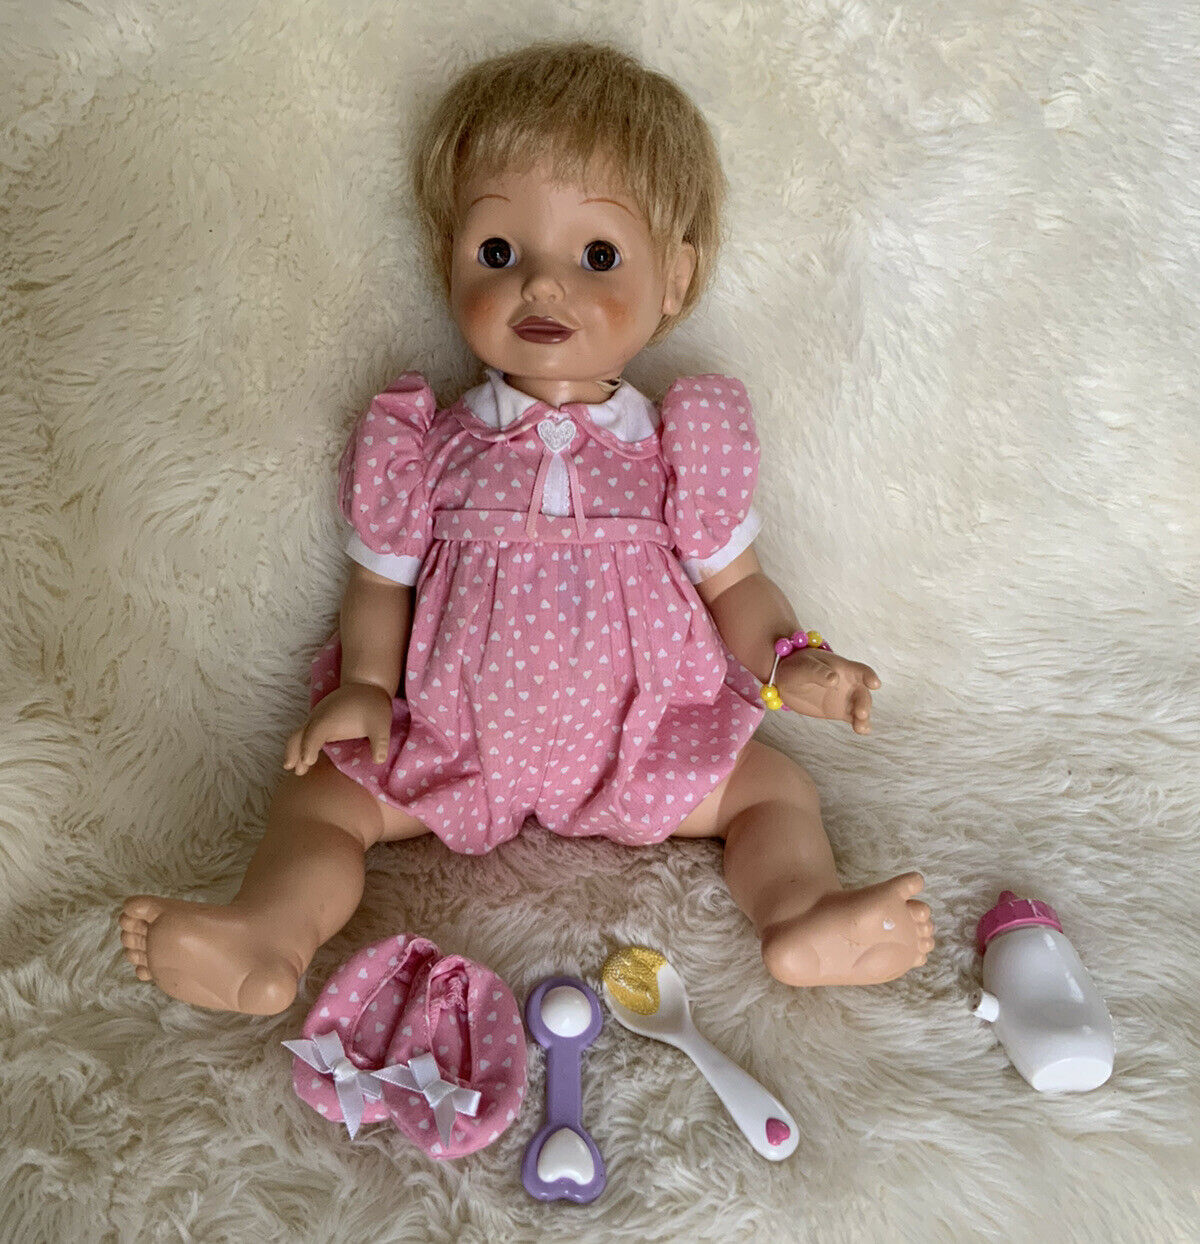 Playmates 2000 Amazing Babies Blond Interactive Doll & Accessories Working